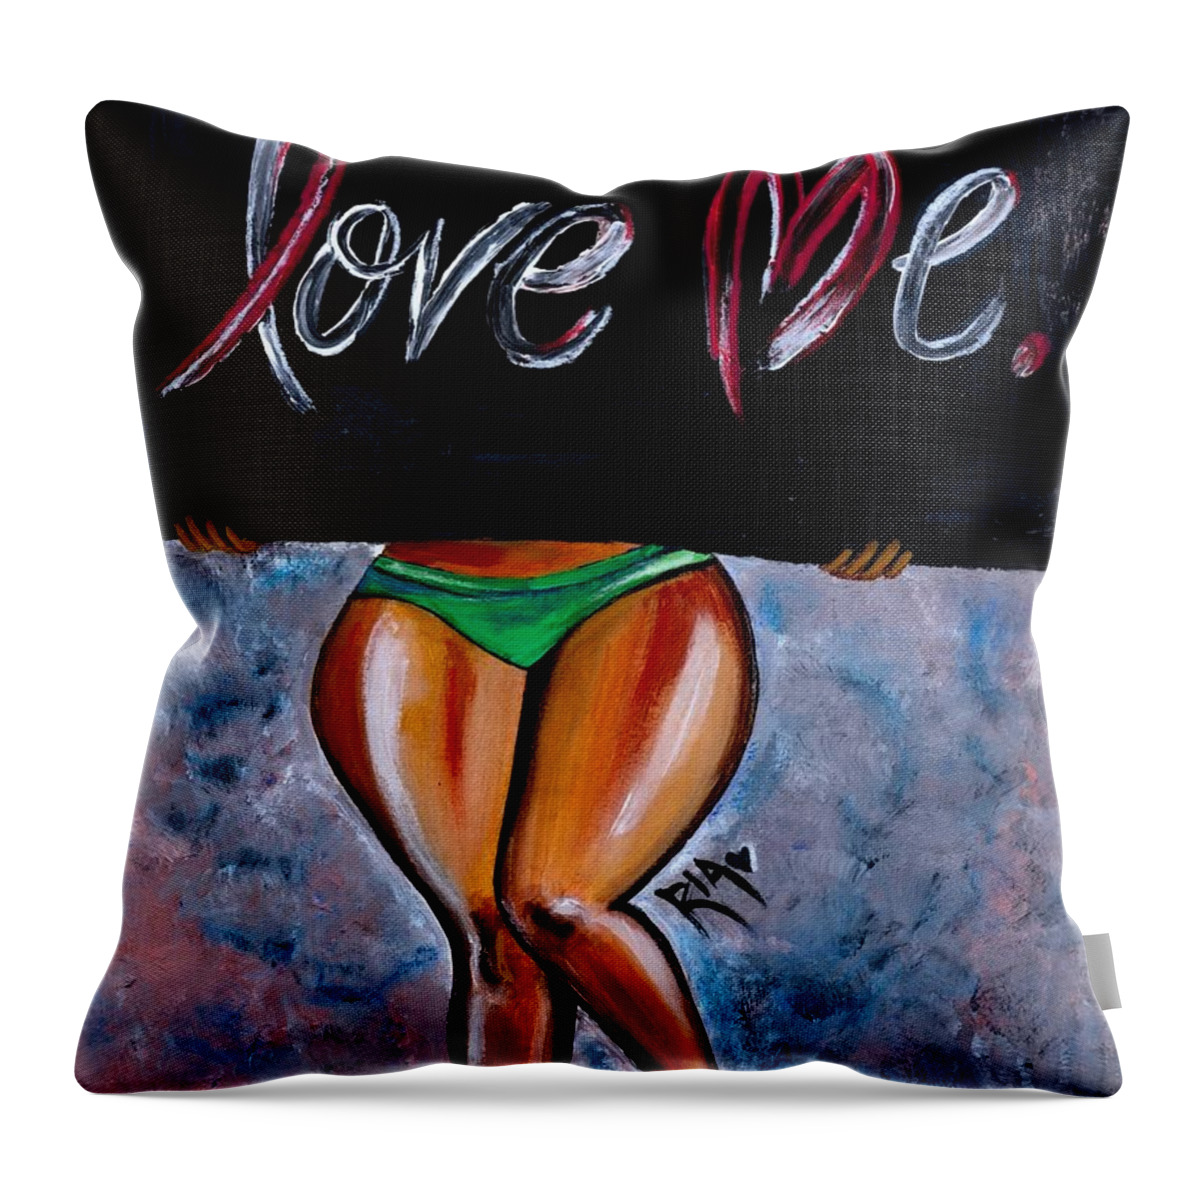 Artbyria Throw Pillow featuring the photograph More To Love by Artist RiA